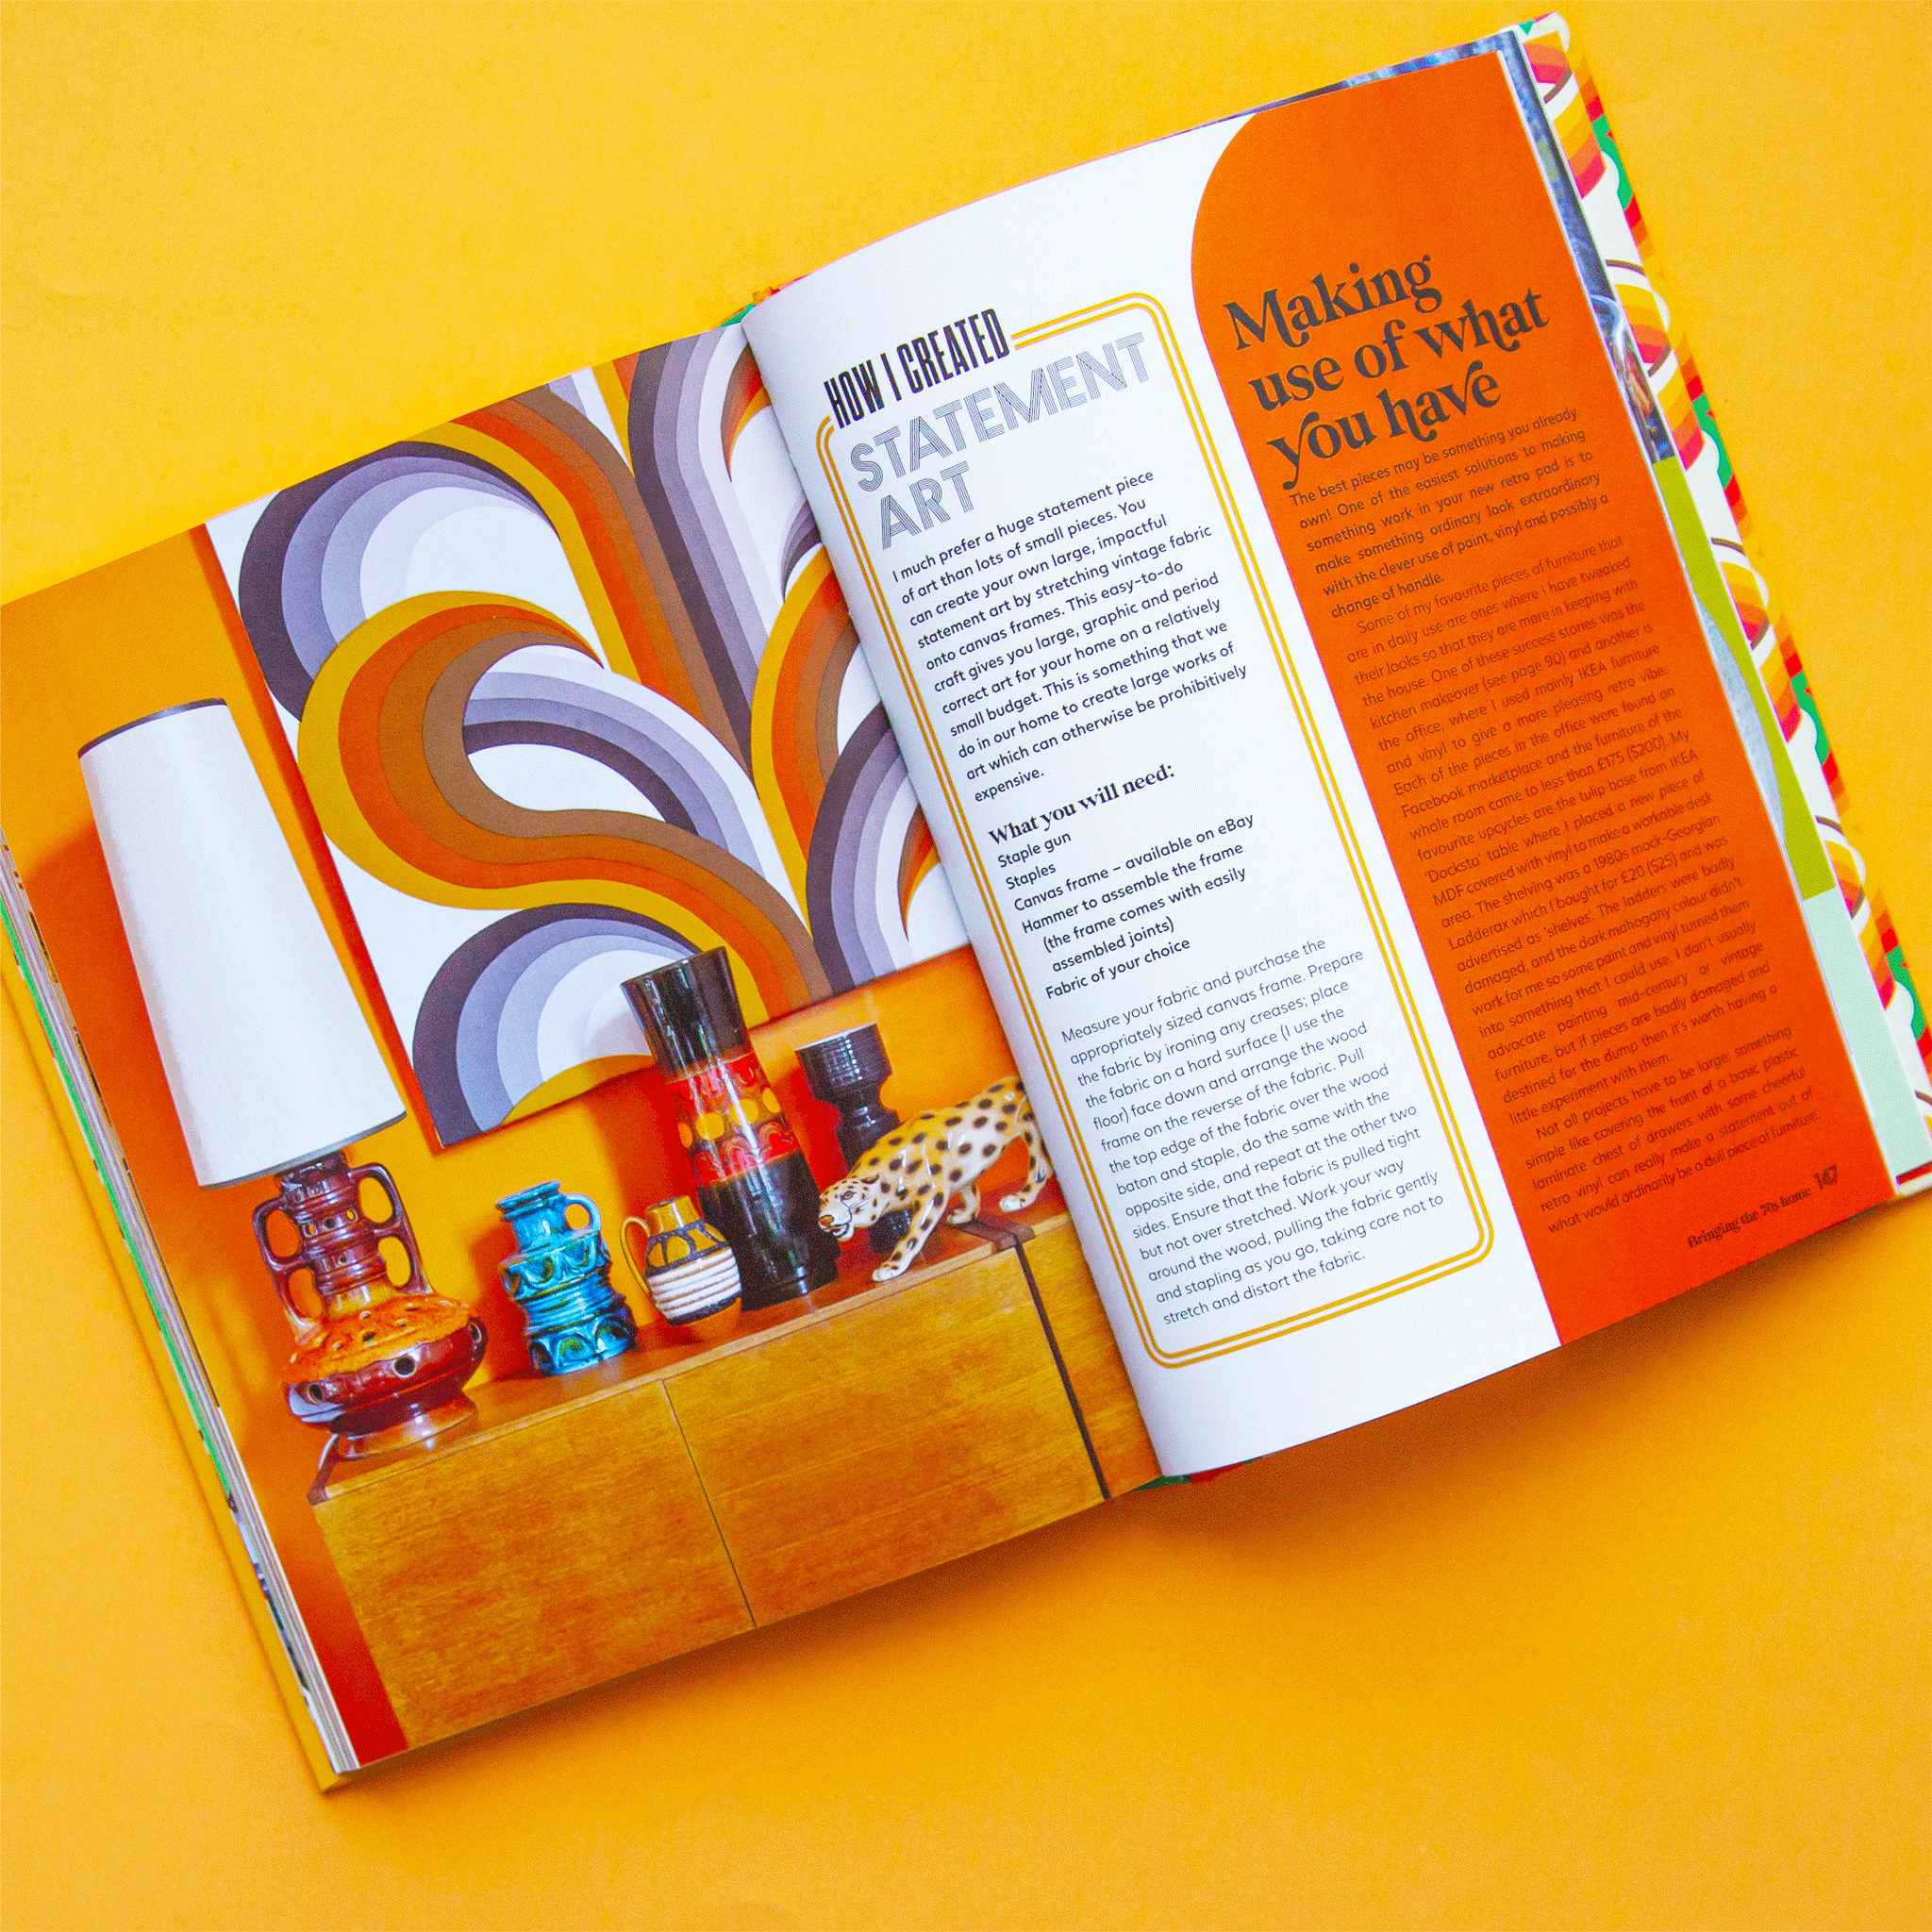 On a yellow background is a look at the inside of the book that features vibrant colors, text and photos of retro spaces. 